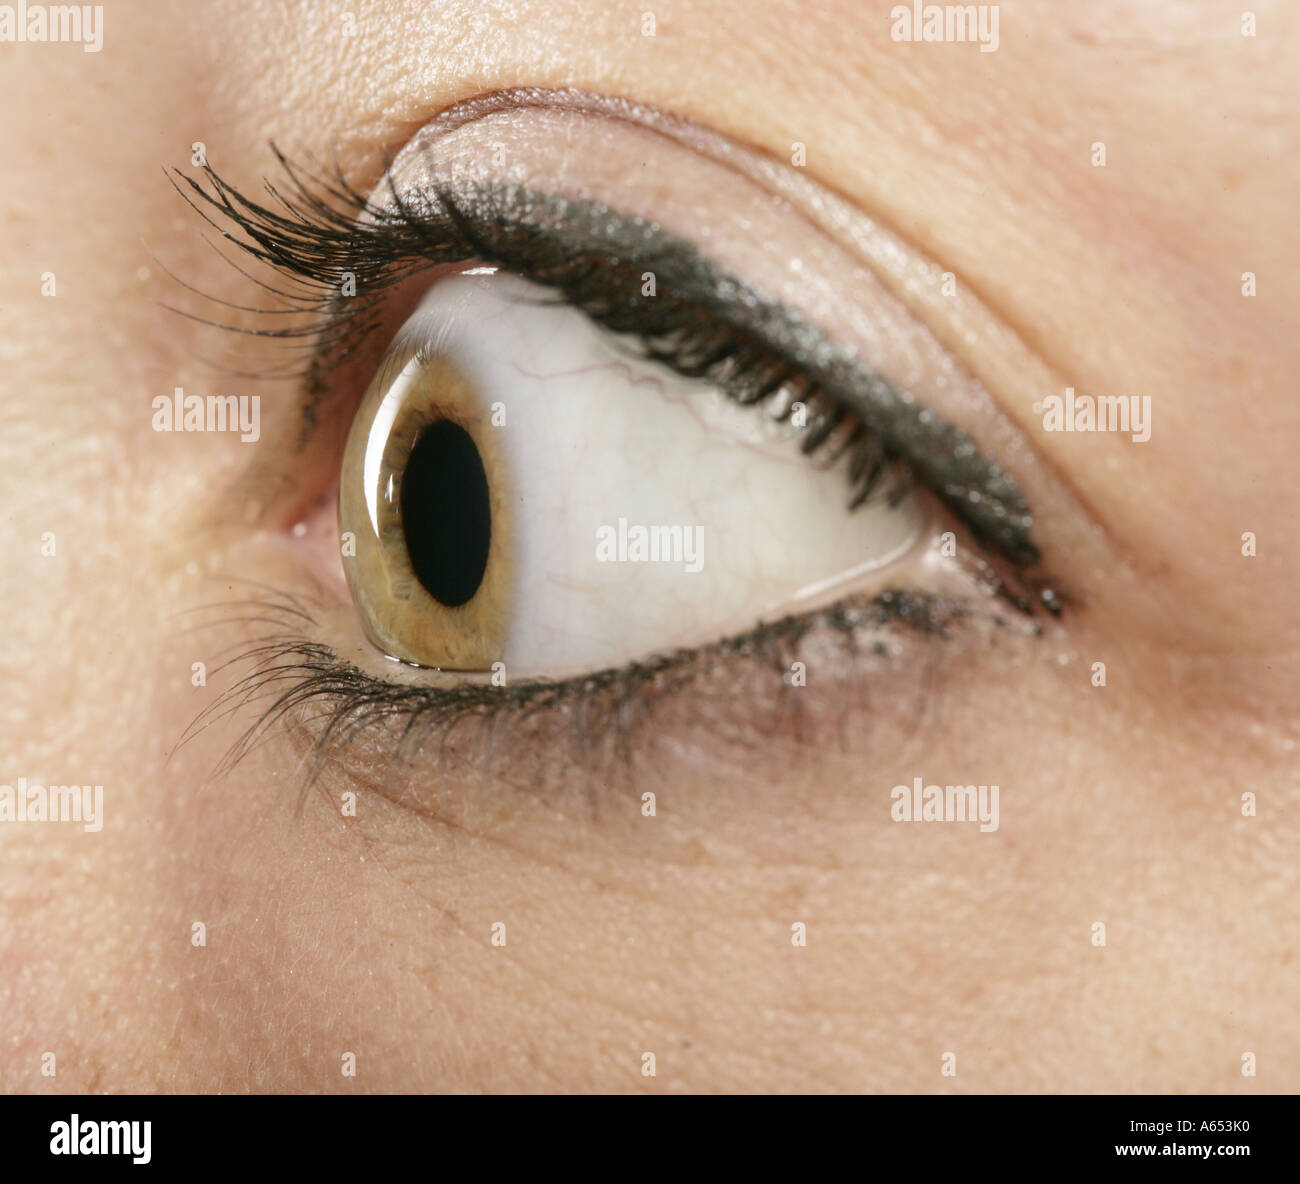 Profile close-up of a woman's eye. Banque D'Images